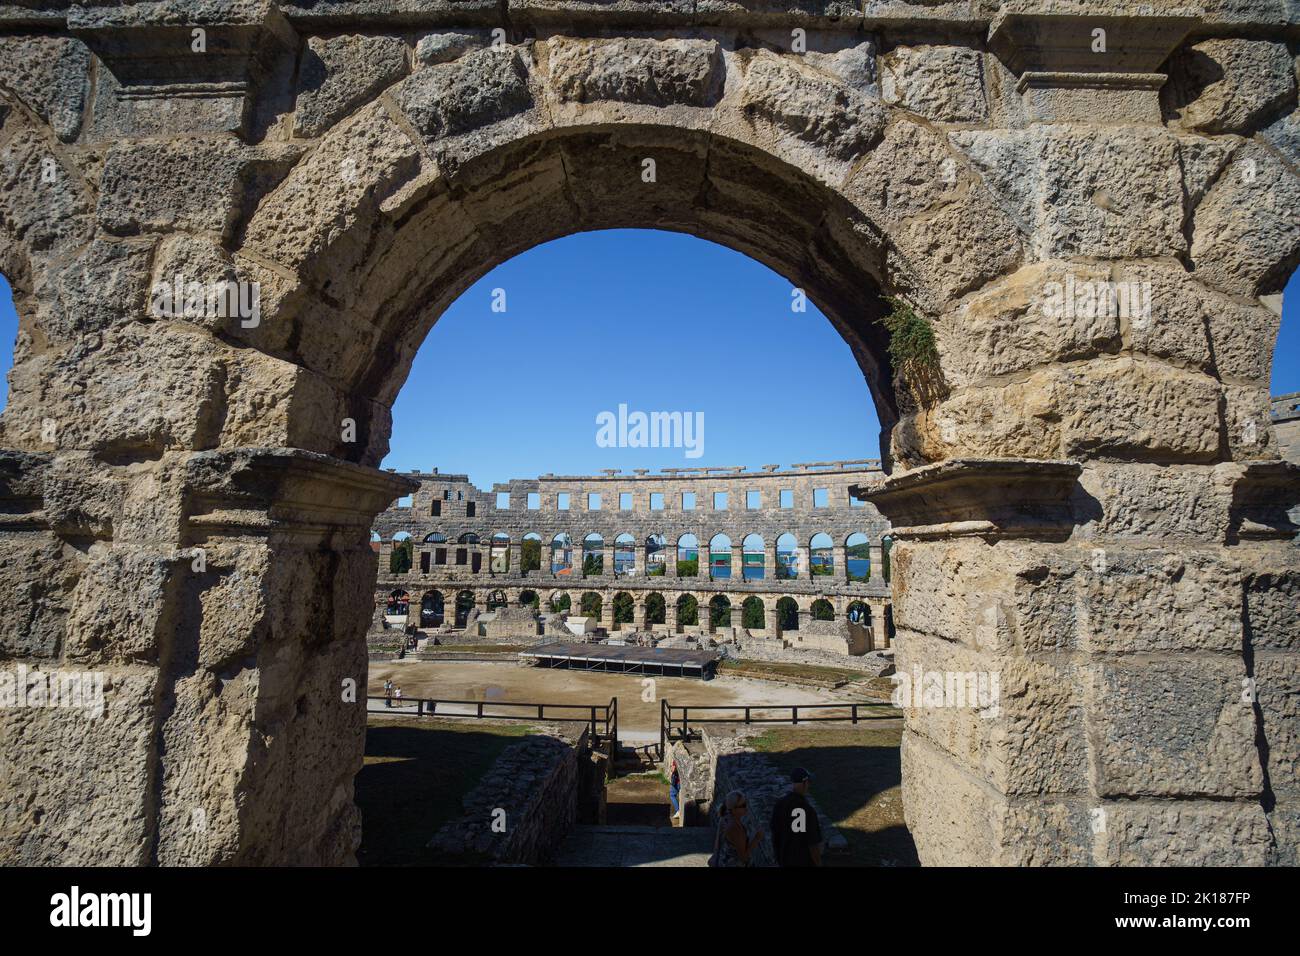 Pula, Croatia - September 2022 September 13: Pula is the city in Istria region, Croatia and is known for Pula Arena Stock Photo